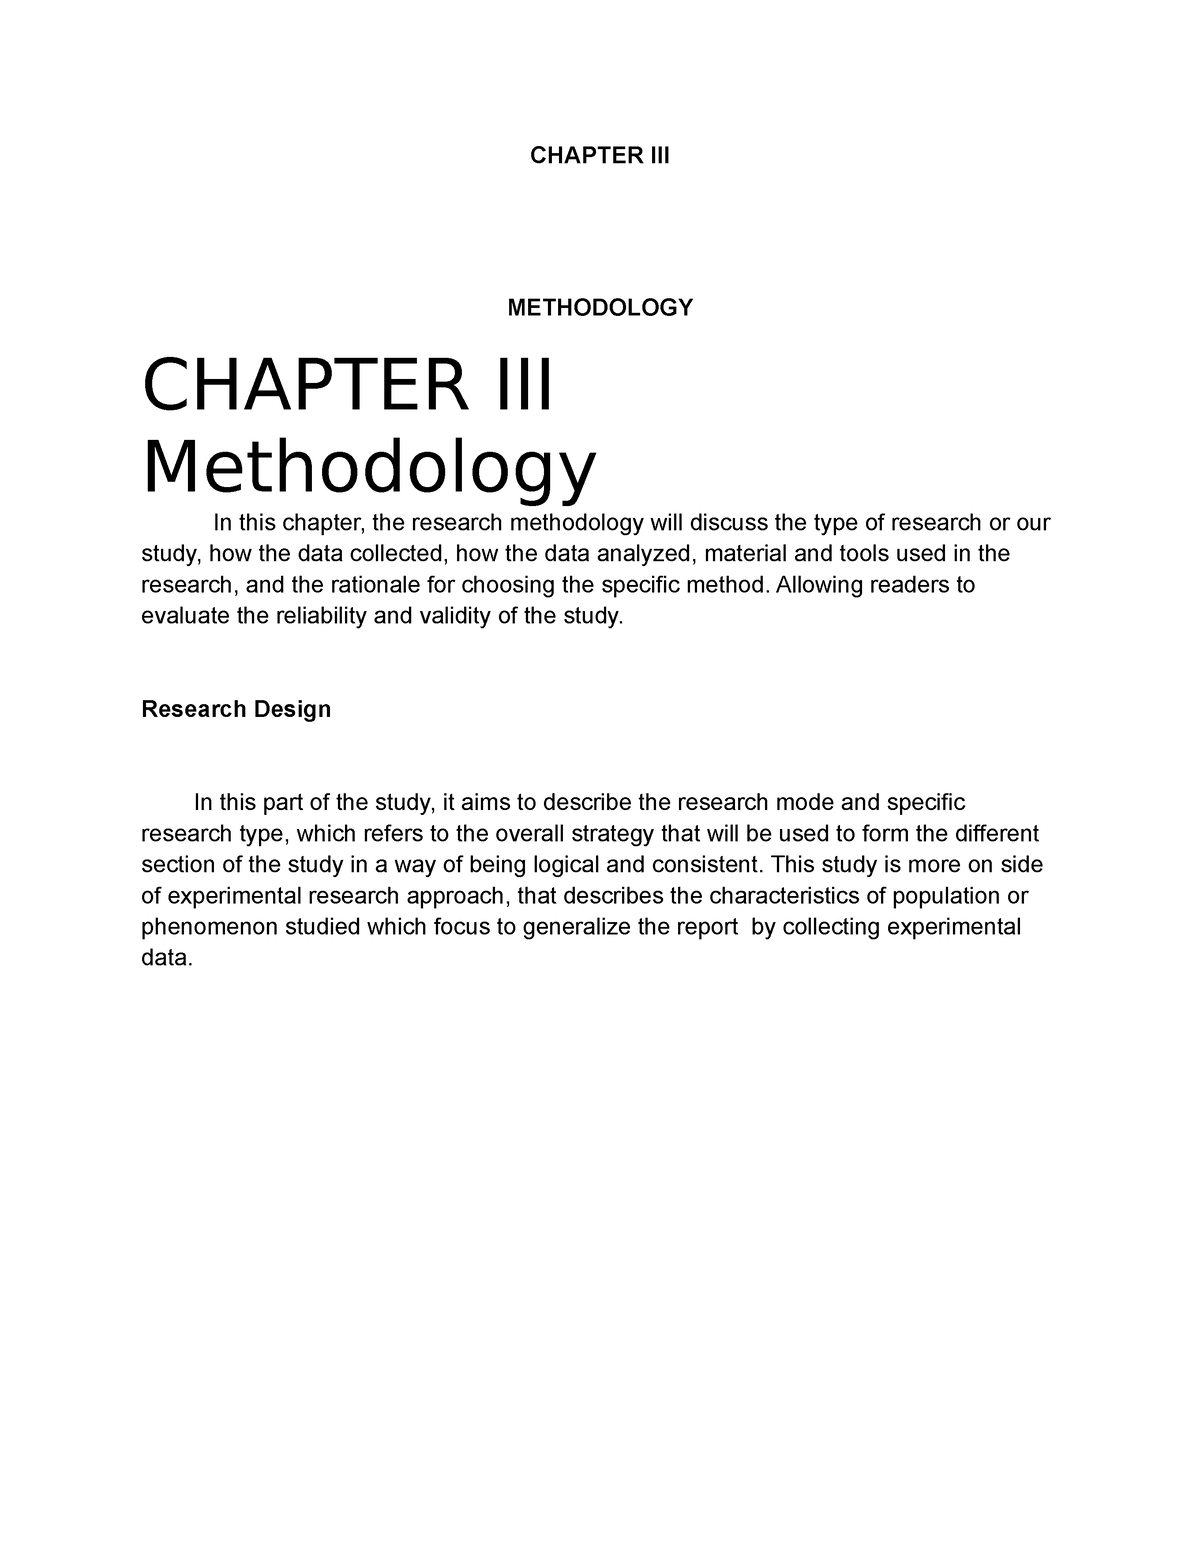 what to write in chapter 3 methodology